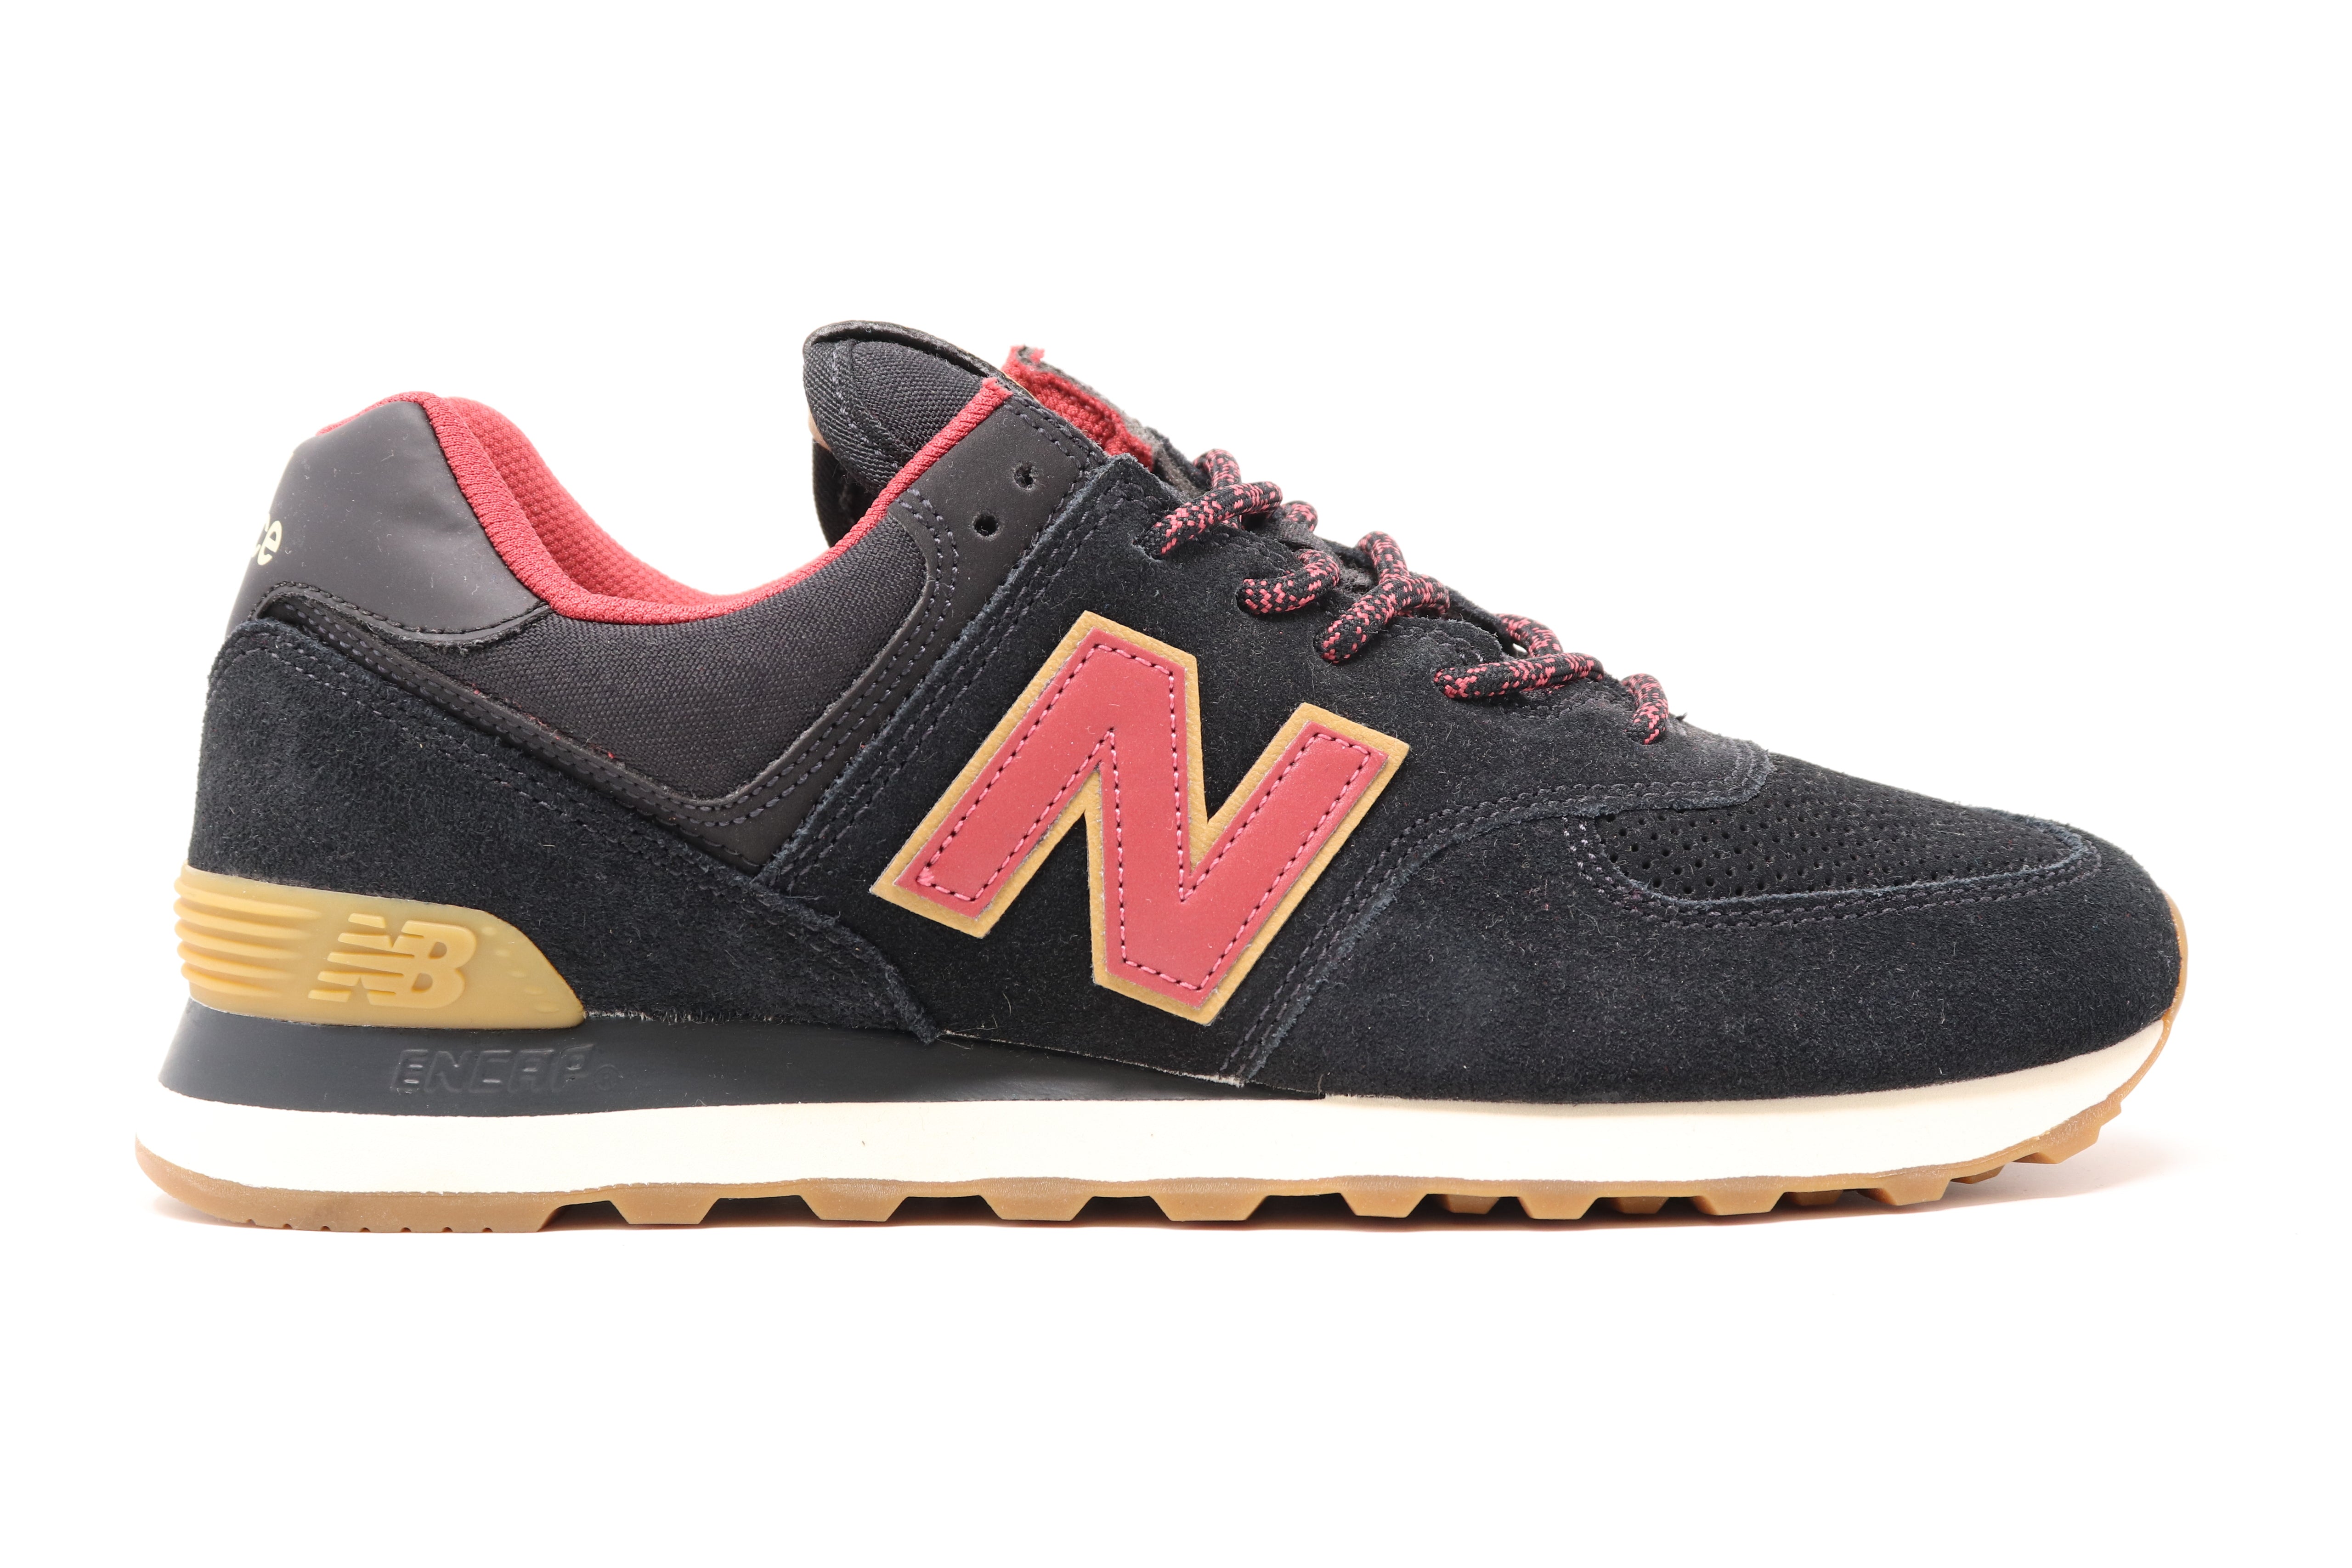 New Balance Black & Red Shoes